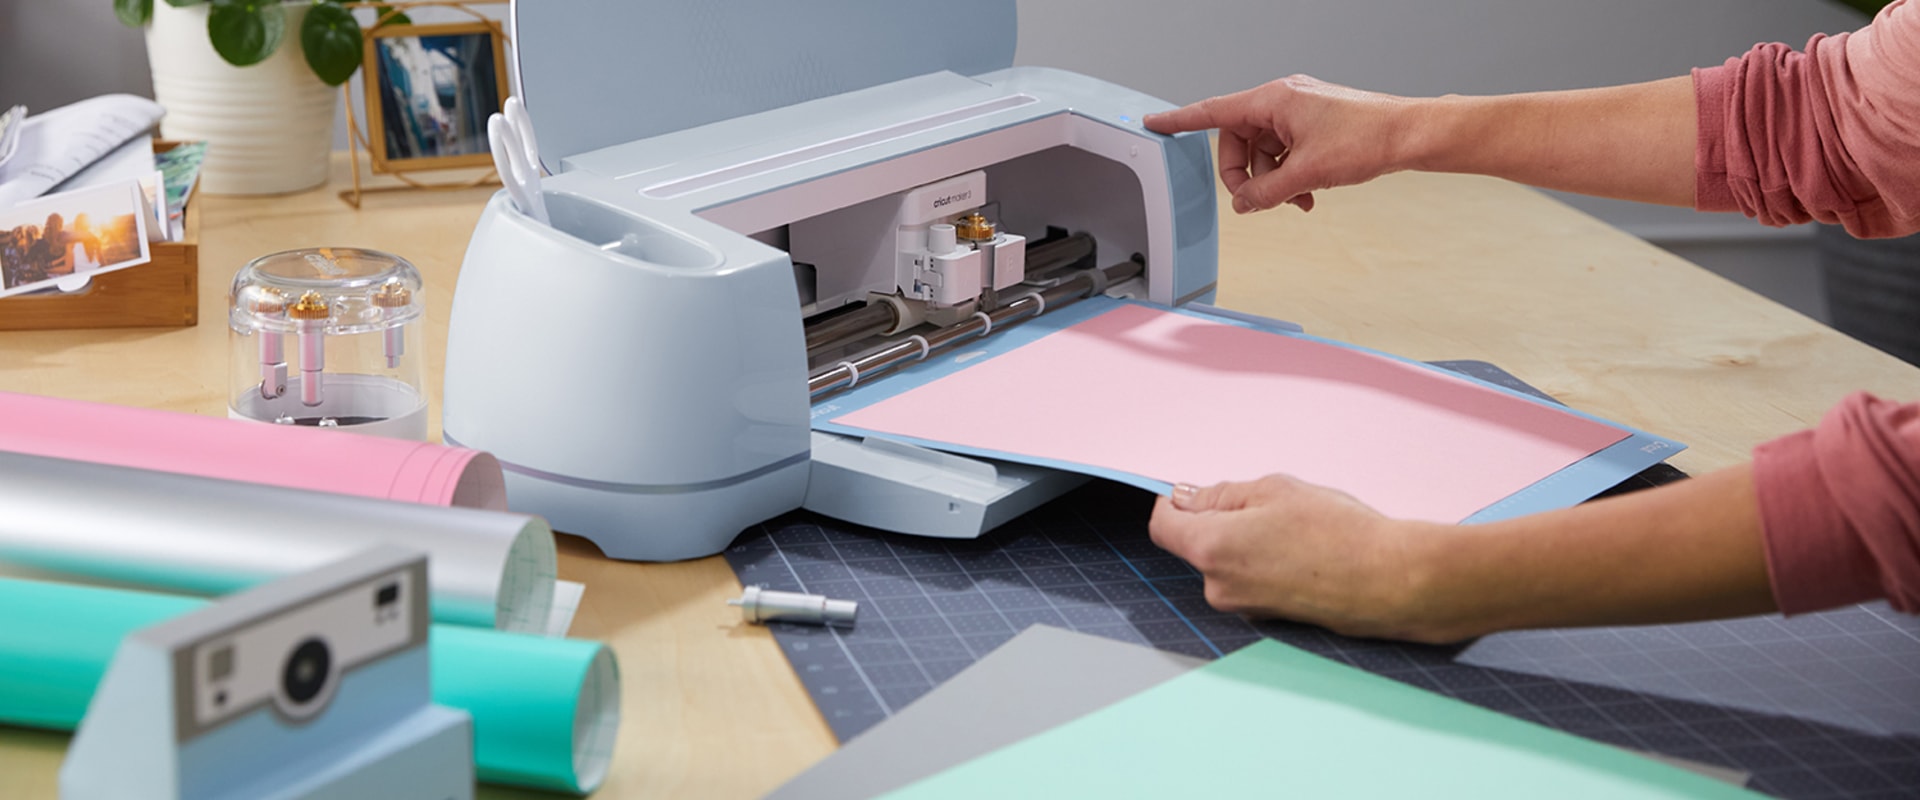 Which Cricut Mat is Best for Crafting with Vinyl?